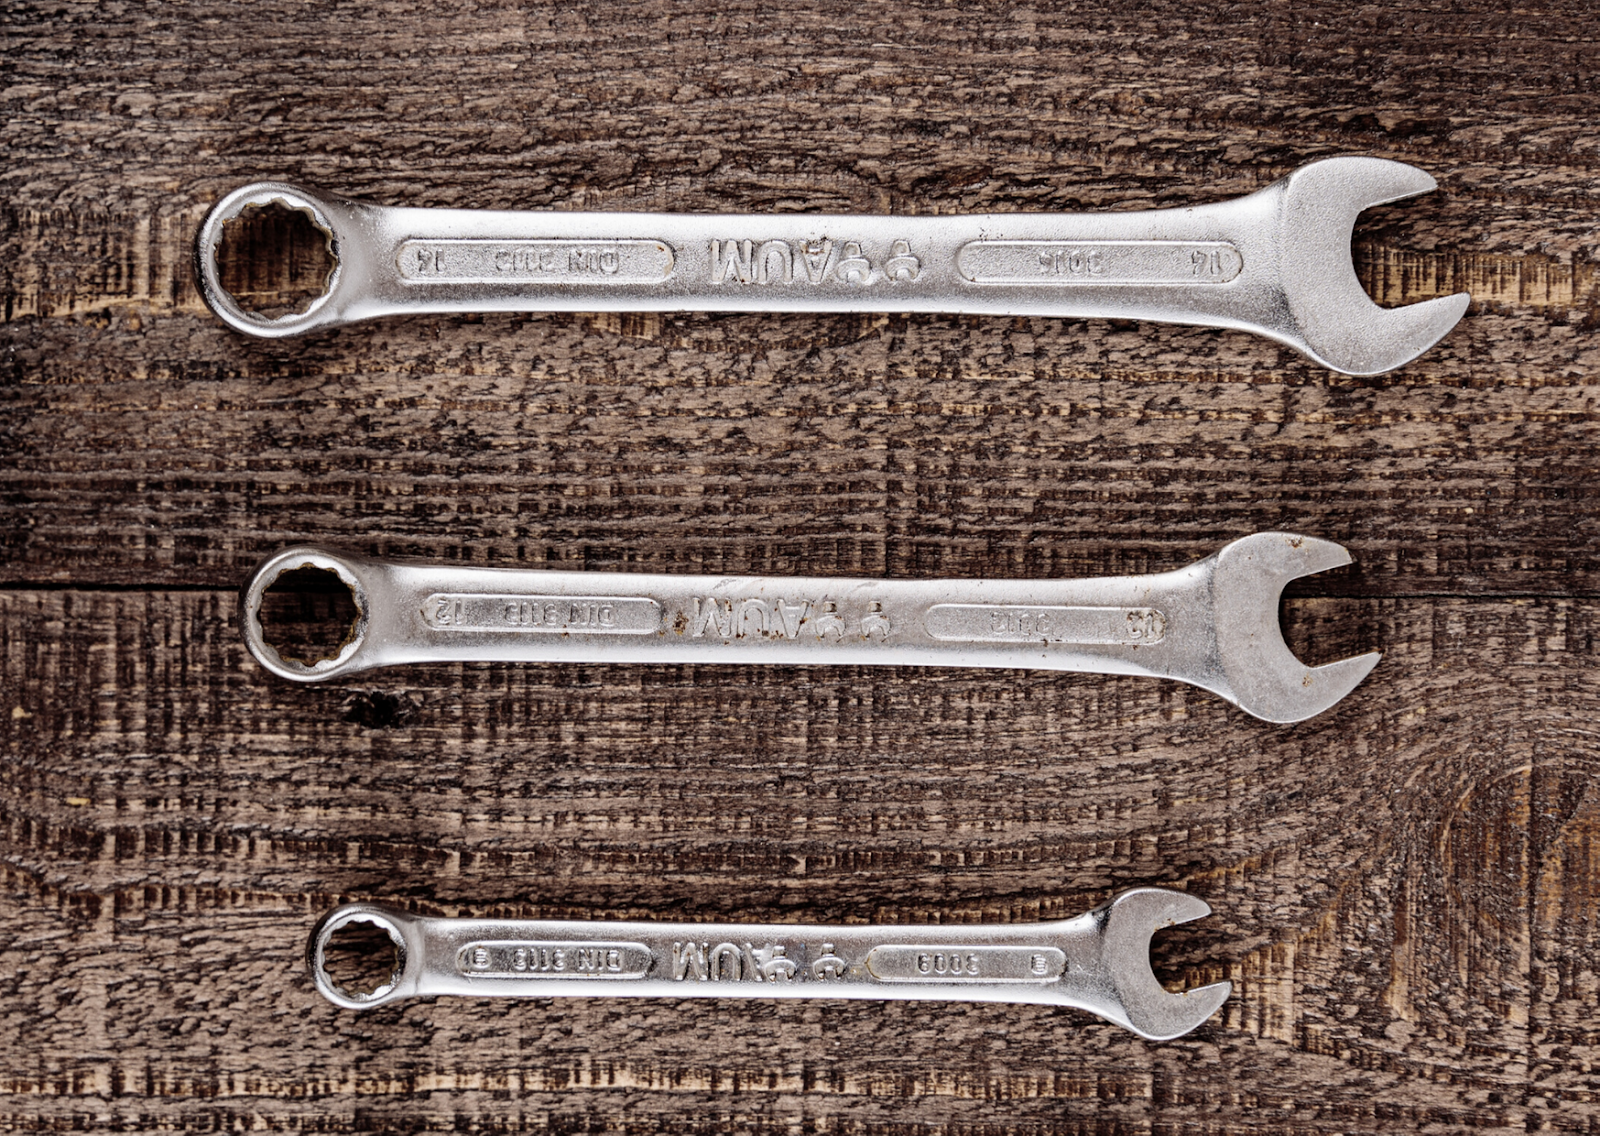 christine harley share pictures of wrenches photos